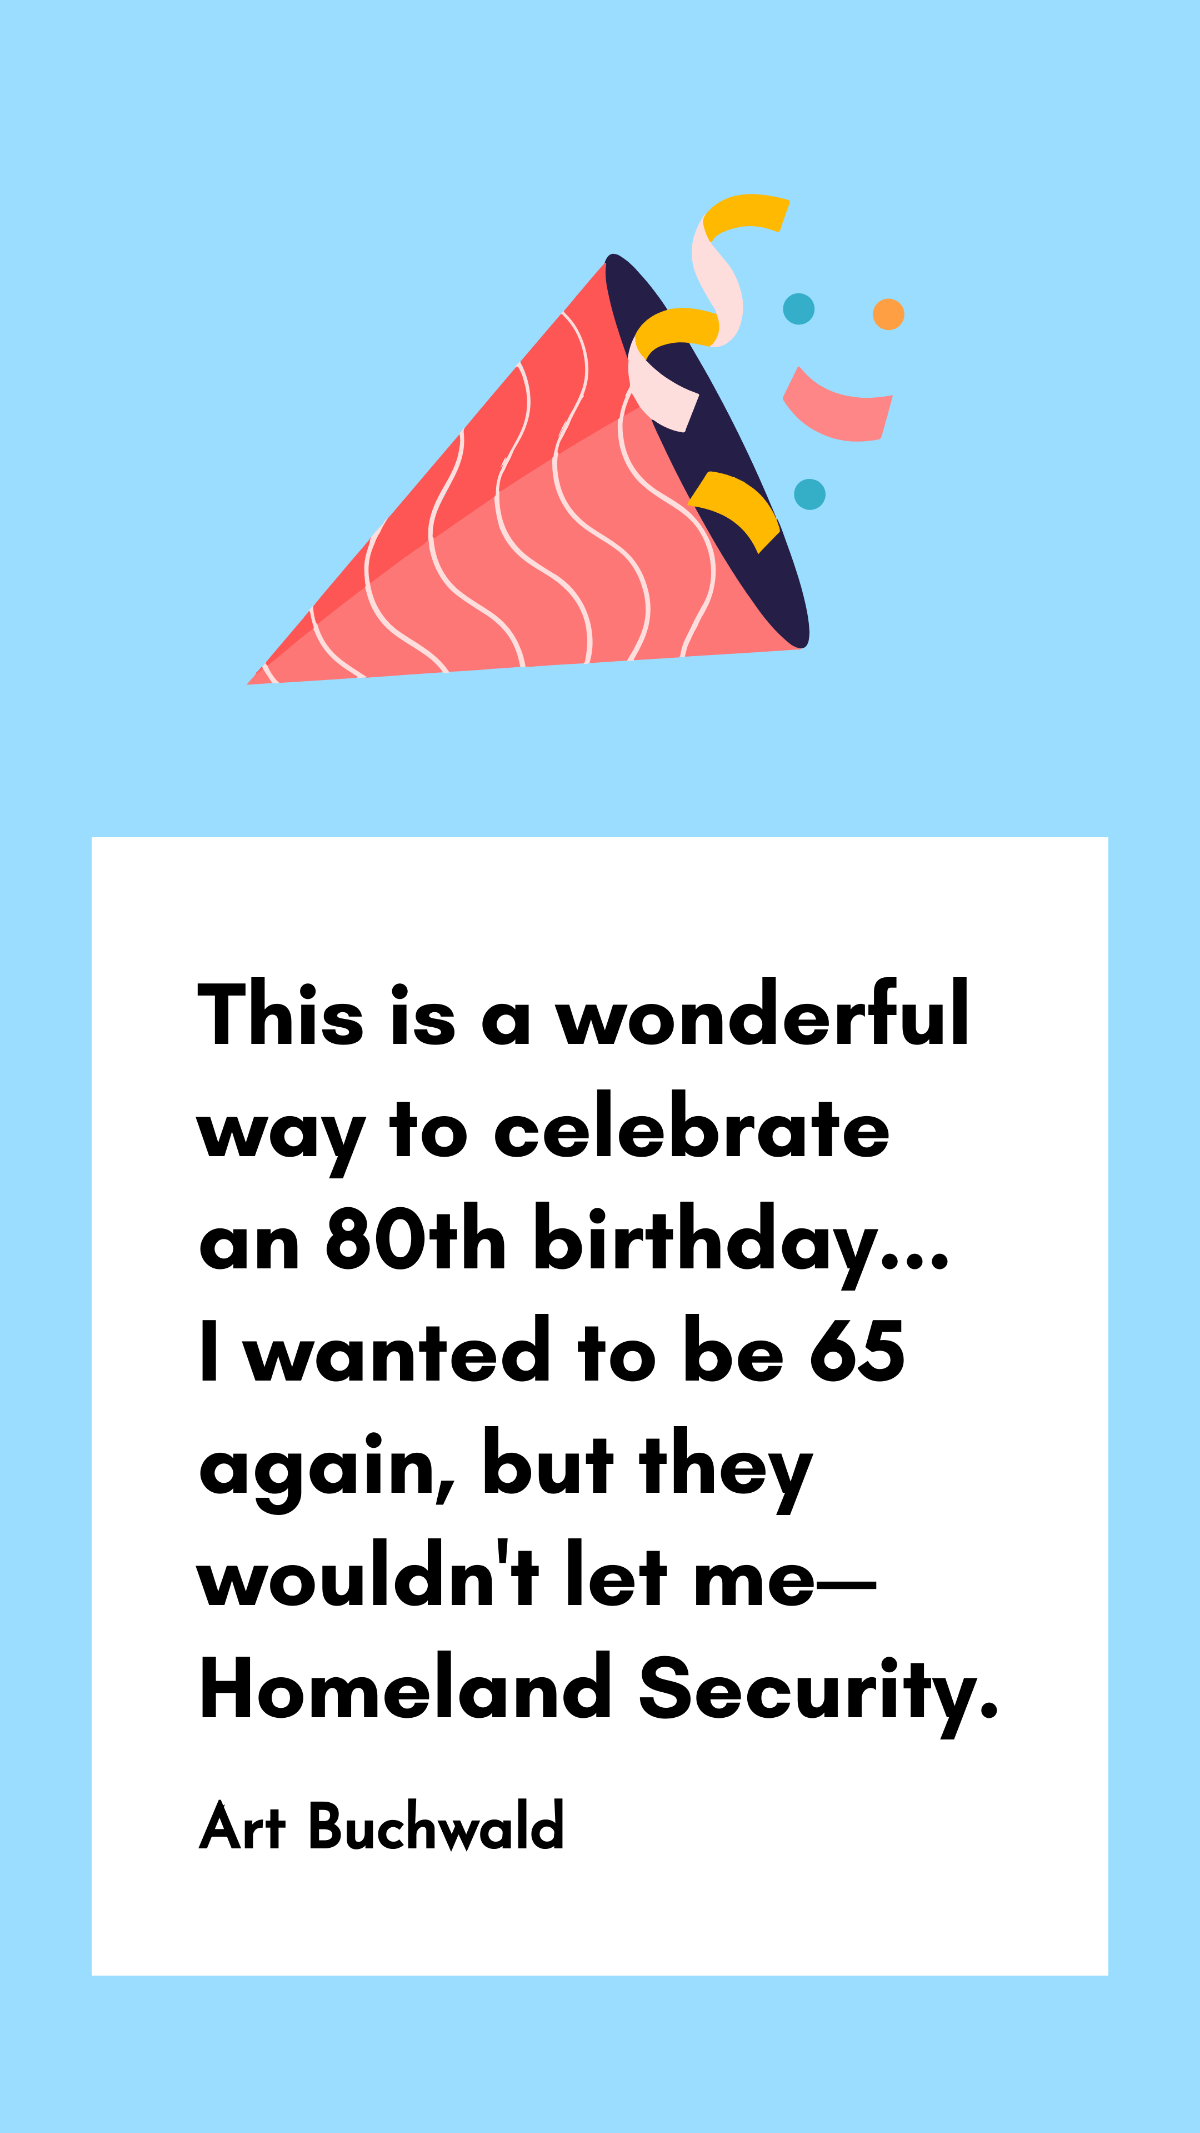 Art Buchwald - This is a wonderful way to celebrate an 80th birthday... I wanted to be 65 again, but they wouldn't let me - Homeland Security. Template